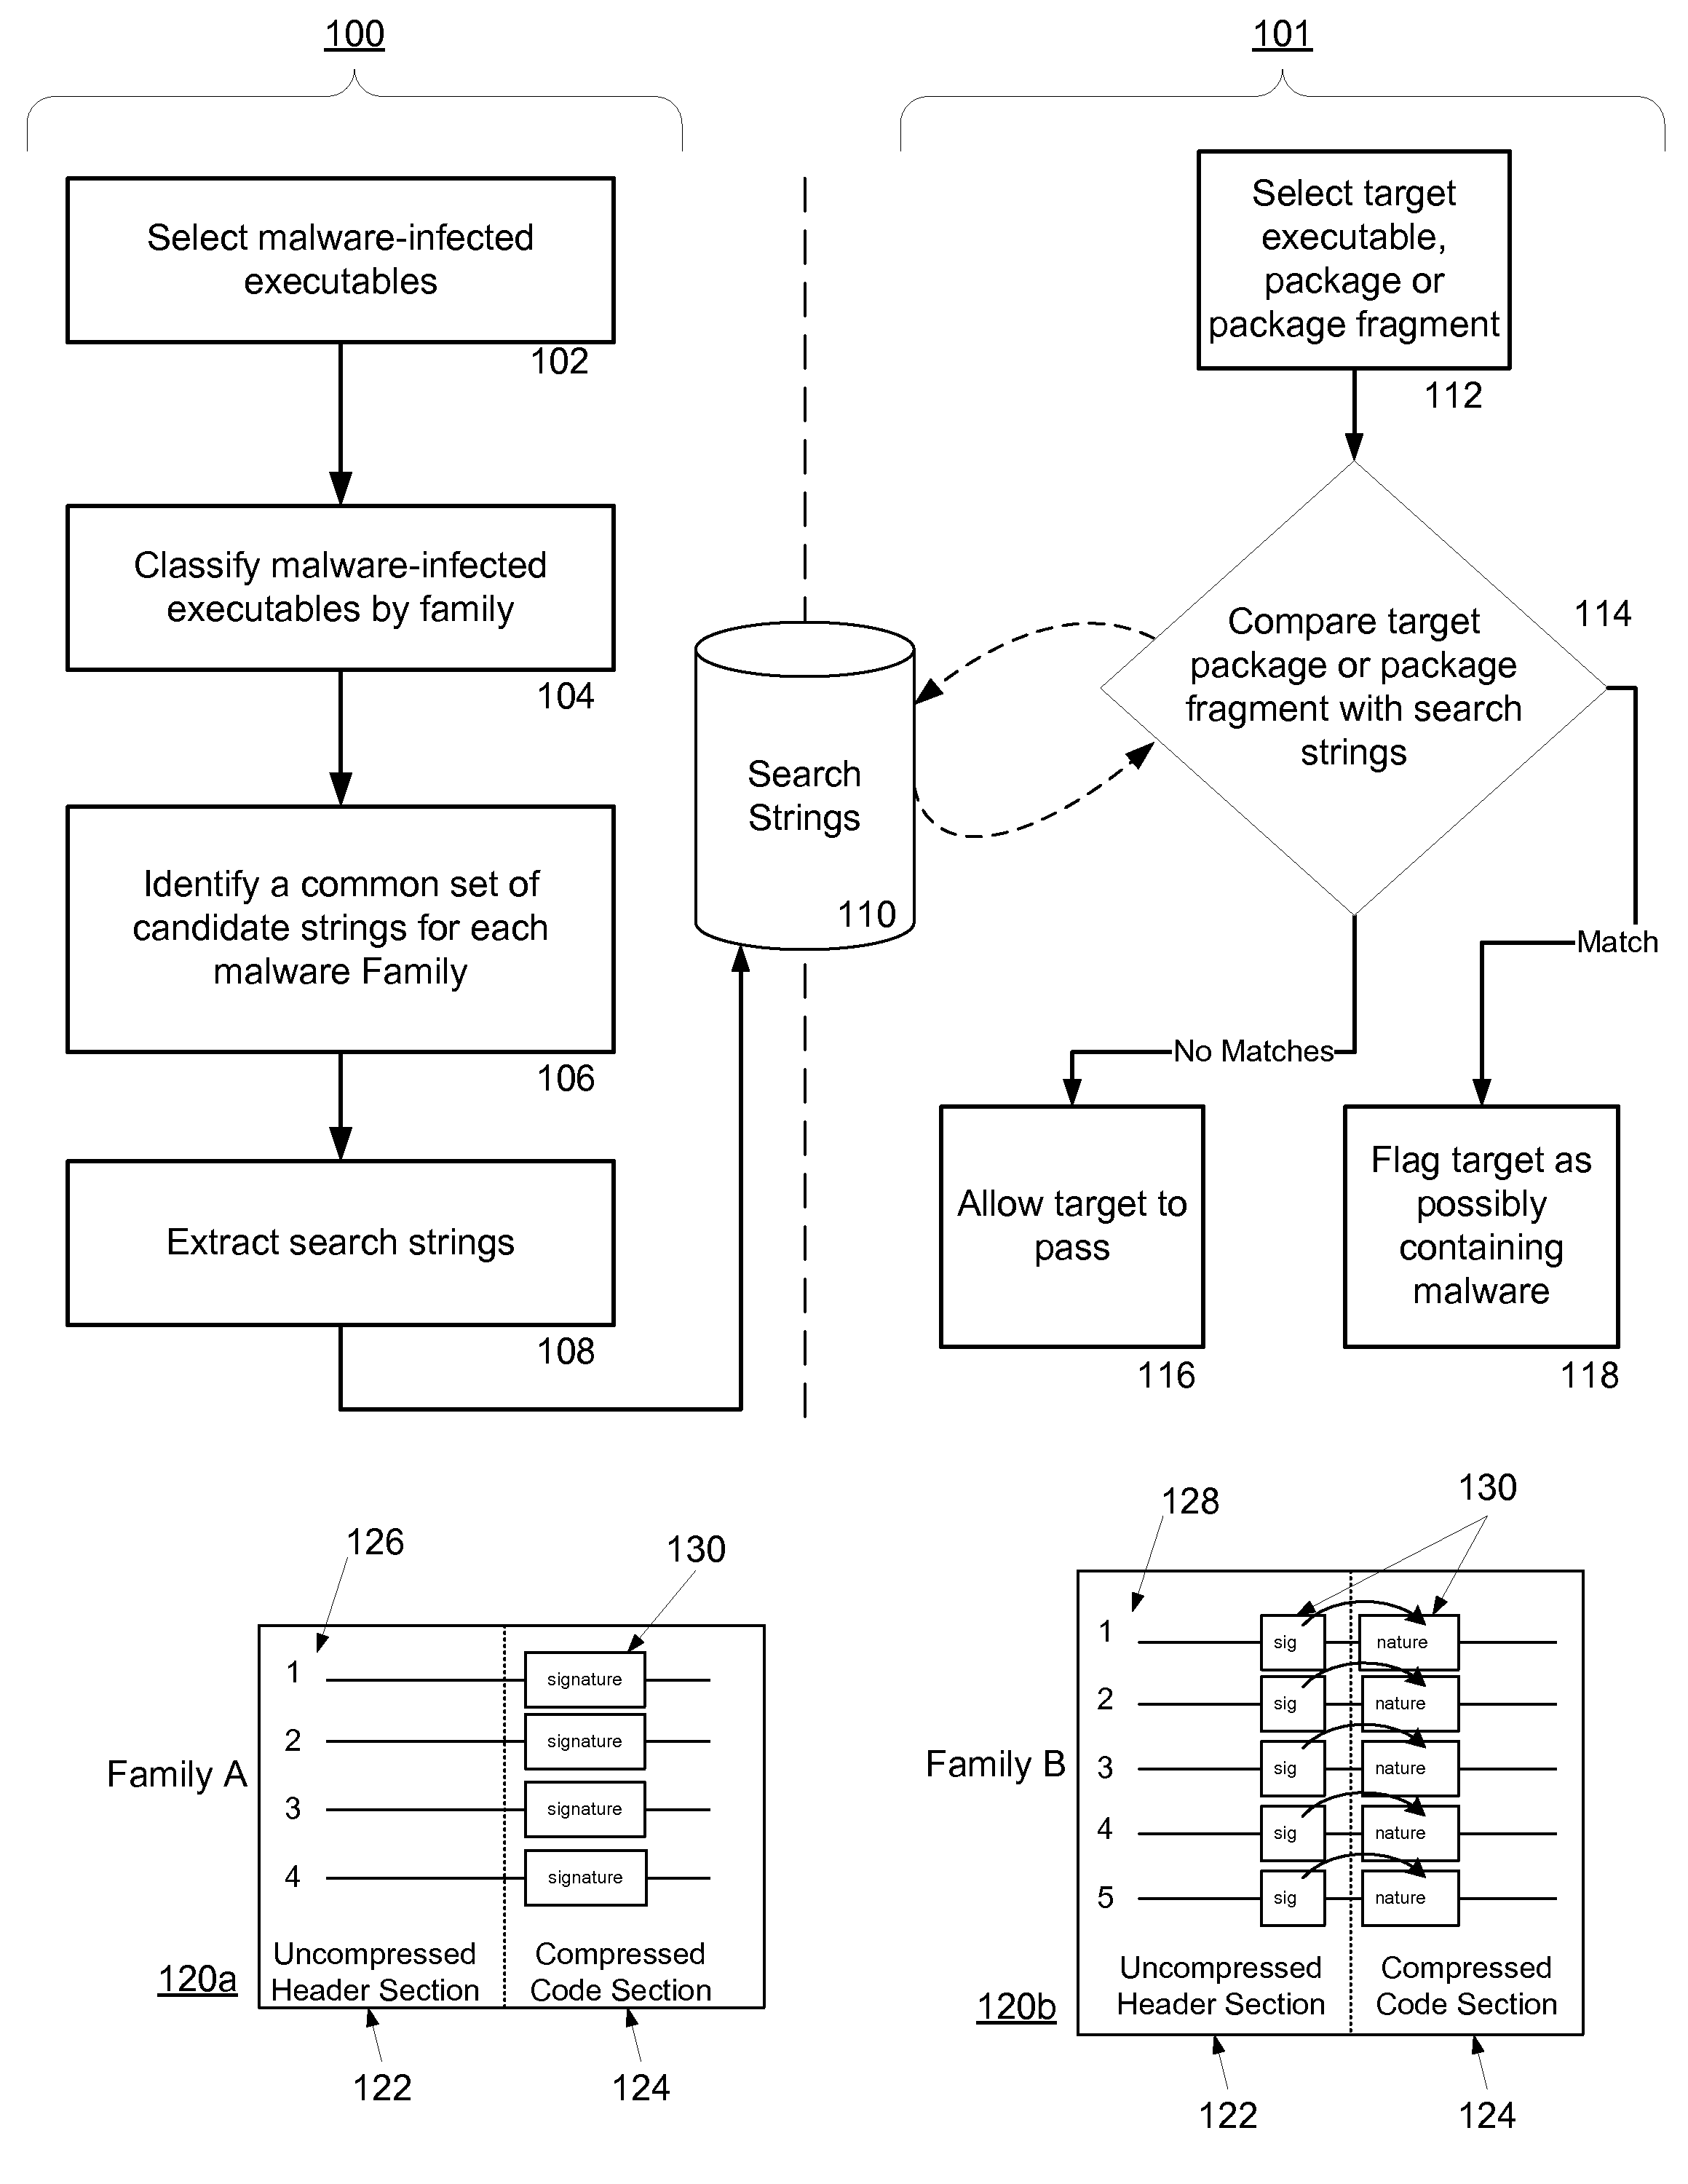 Non-Signature Malware Detection System and Method for Mobile Platforms